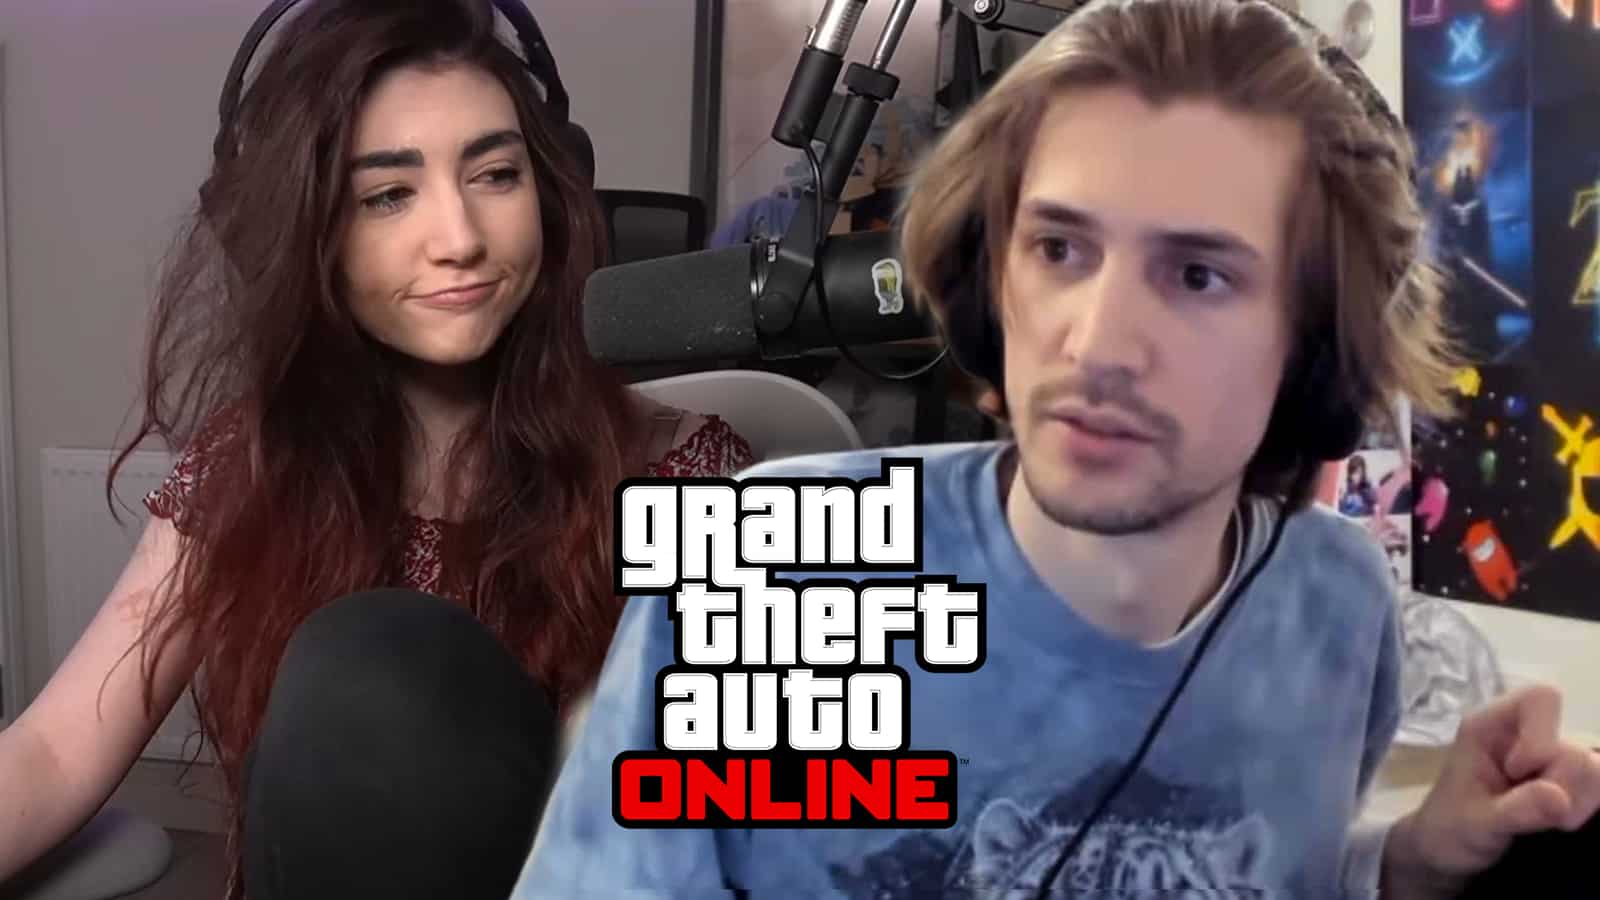 xQc looks shocked next to fellow Twitch streamer Wolfabelle